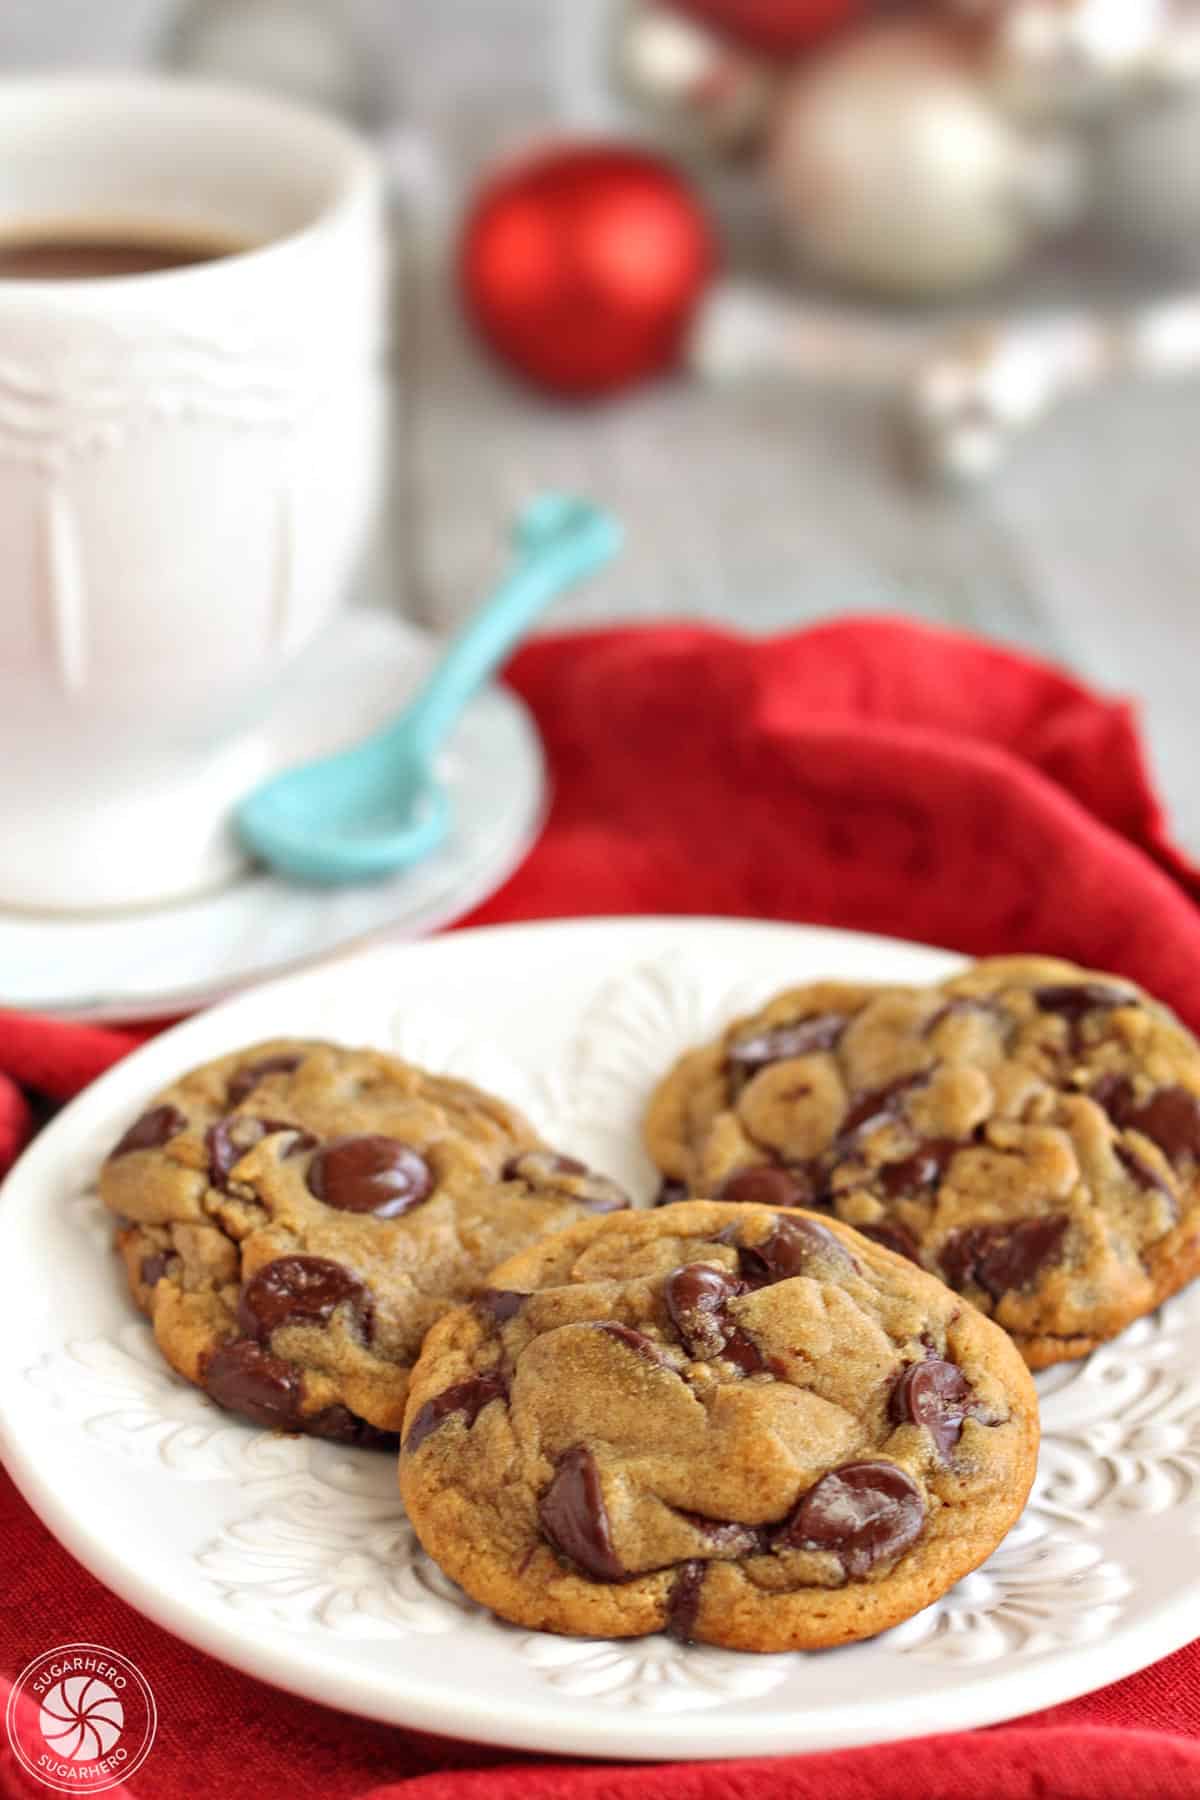 Three Gingerbread Chocolate Chip Cookies on a white plate with a red napkin in the background.